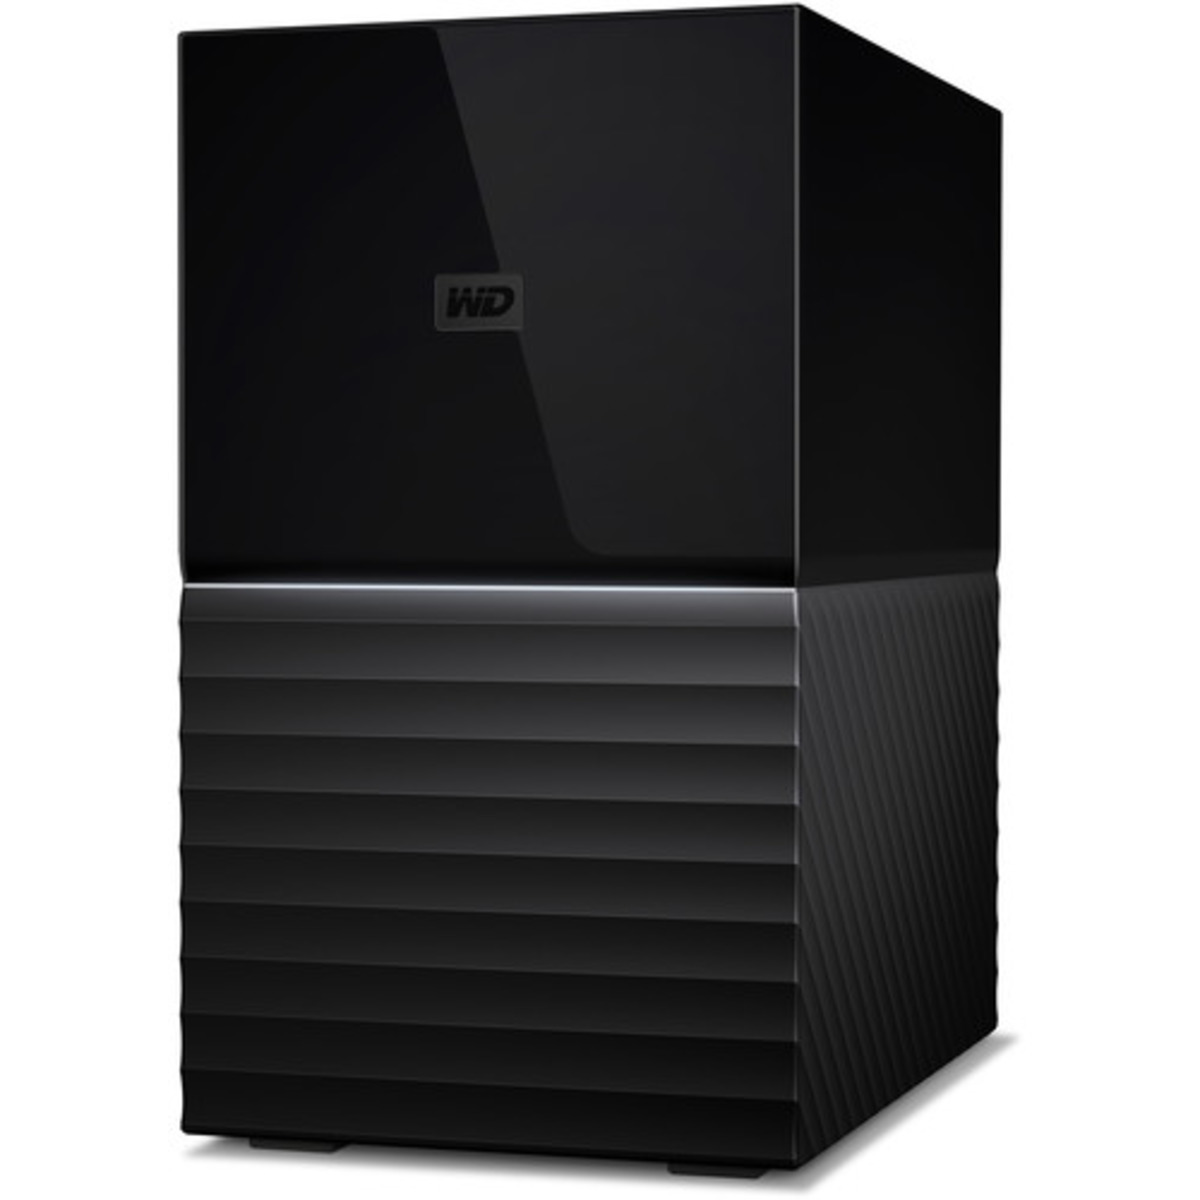 buy Western Digital My Book DUO Gen 2 48tb Desktop DAS - Direct Attached Storage Device 2x24000gb Western Digital Ultrastar HC580 WUH722424ALE6L4 3.5 7200rpm SATA 6Gb/s HDD ENTERPRISE Class Drives Installed - Burn-In Tested - ON SALE - nas headquarters buy network attached storage server device das new raid-5 free shipping simply usa My Book DUO Gen 2